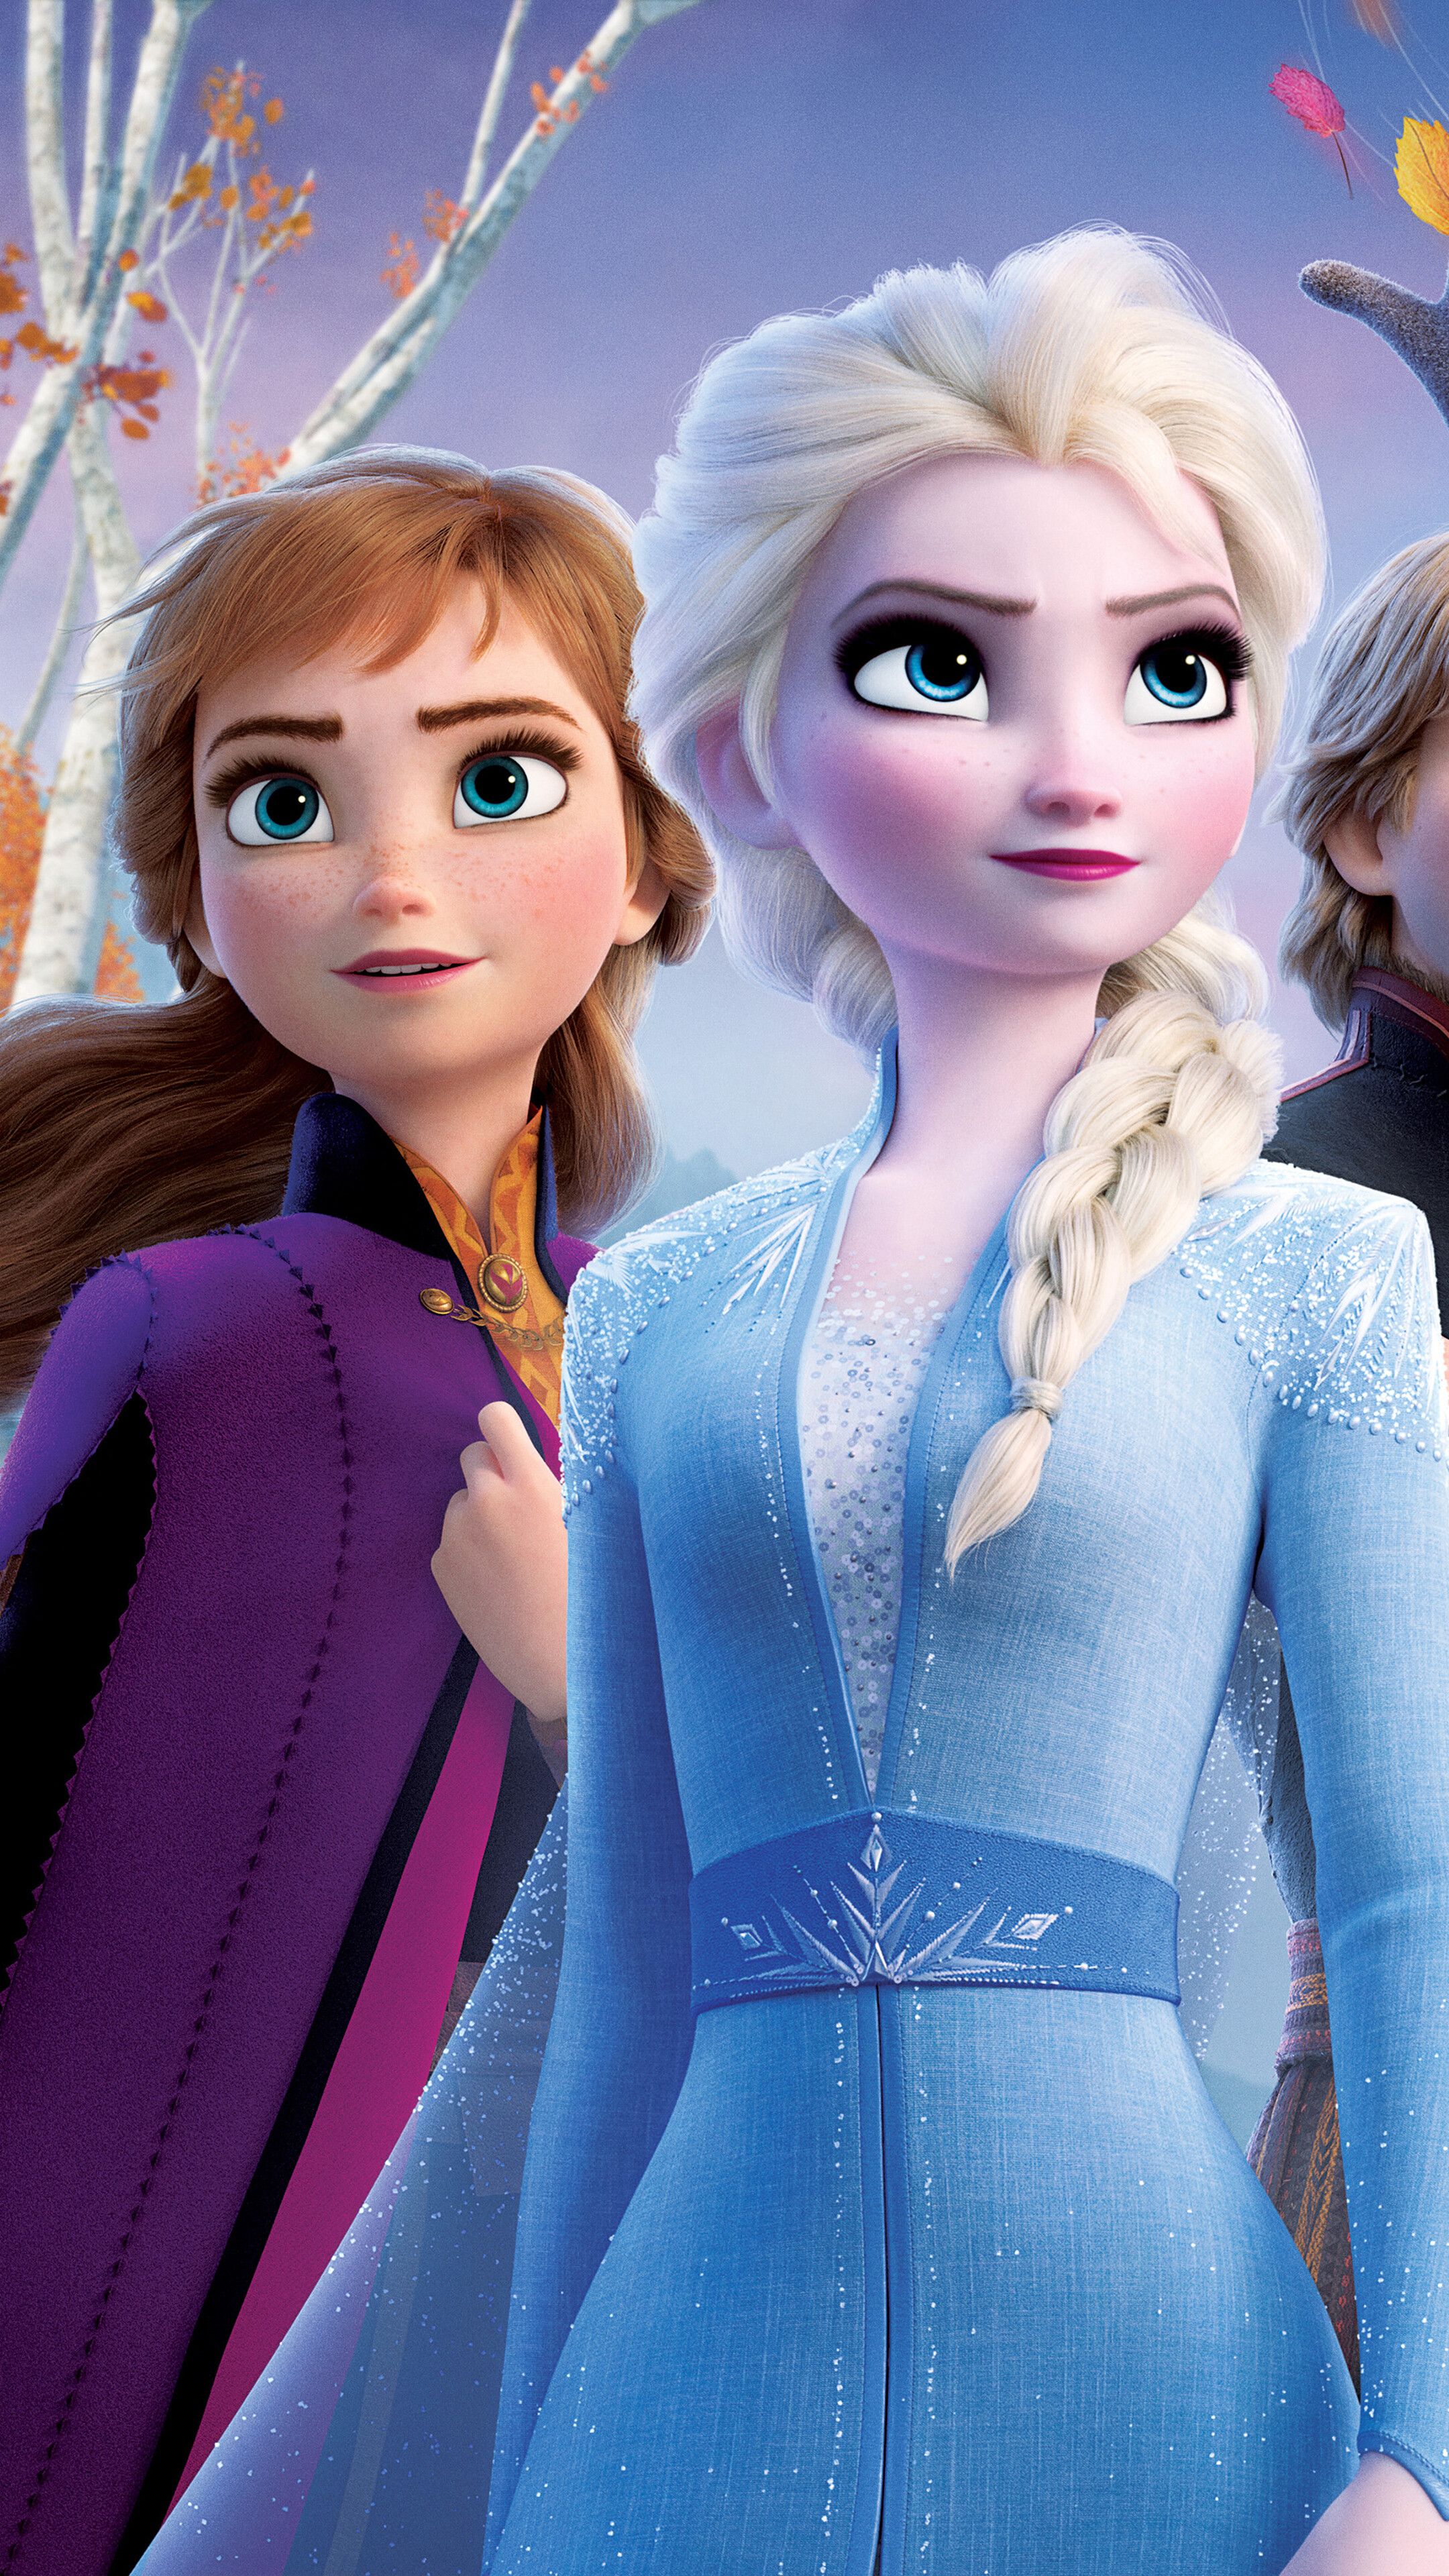 Frozen Poster, Elsa, Anna, Kristoff, Olaf phone HD Wallpaper, Image, Background, Photo and Picture. Mocah HD Wallpaper